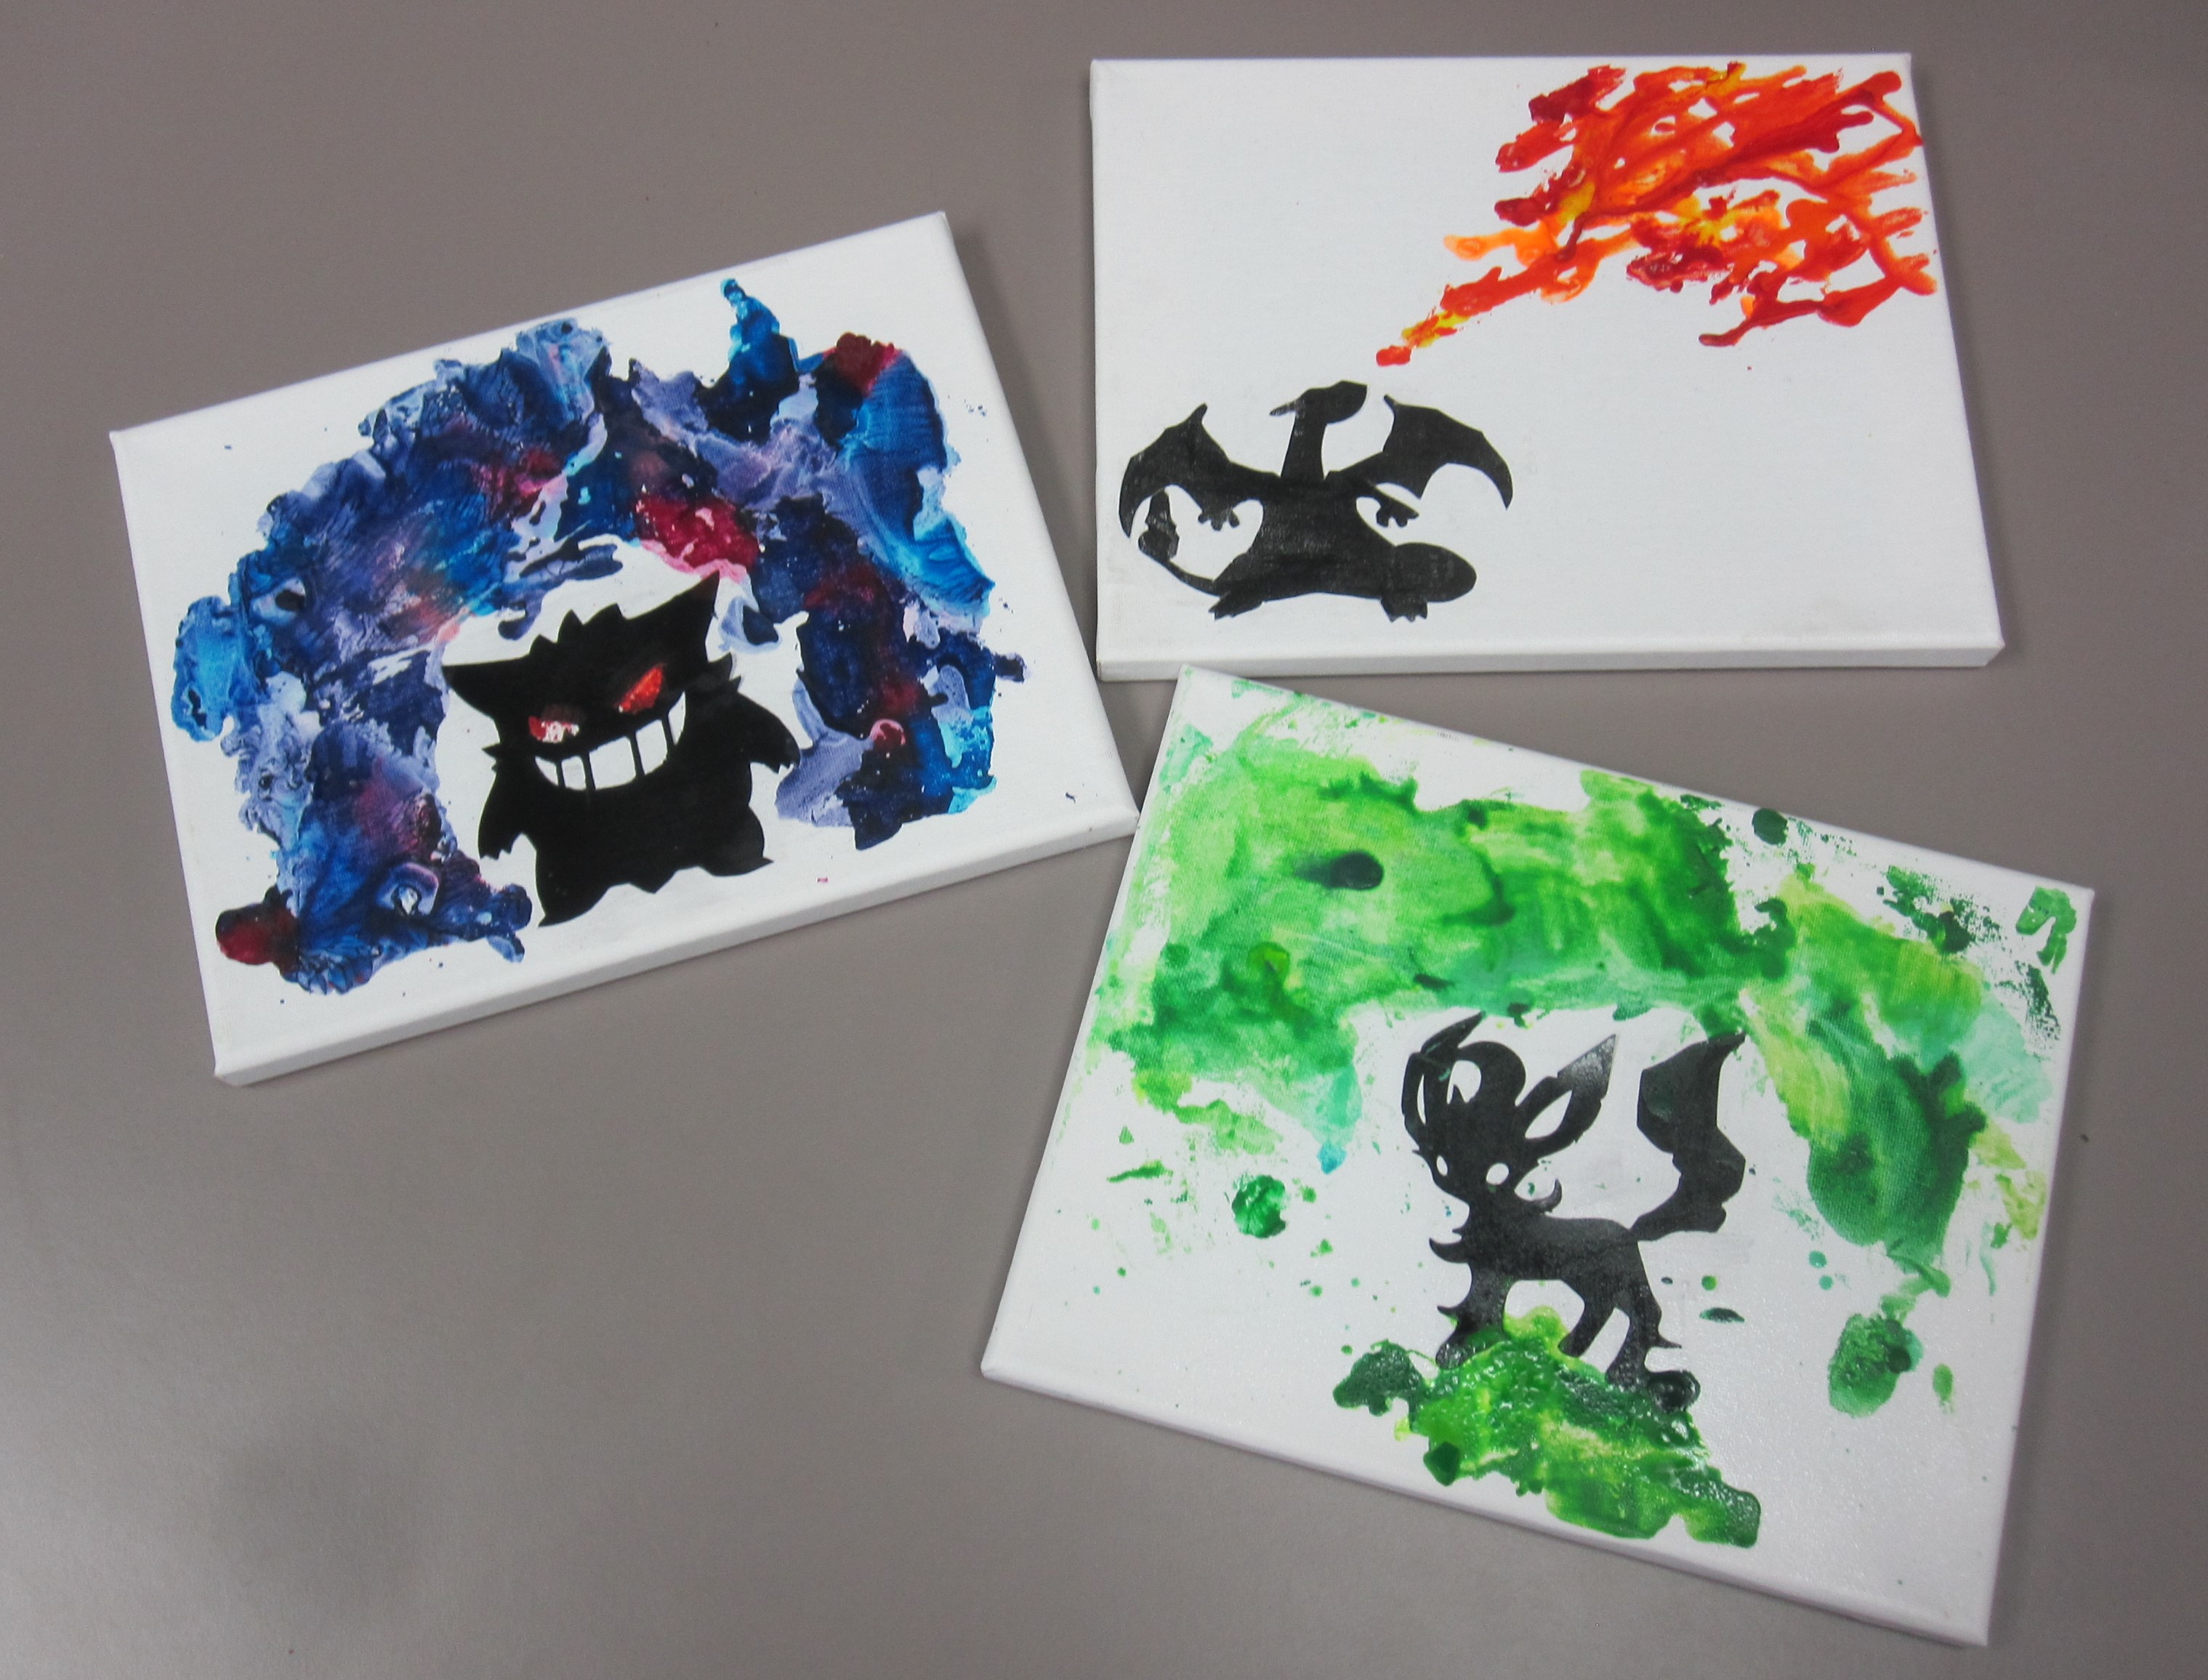 3 white canvas with silhouettes of Gengar, Charizard, and Leafeon surrounded by melted crayon